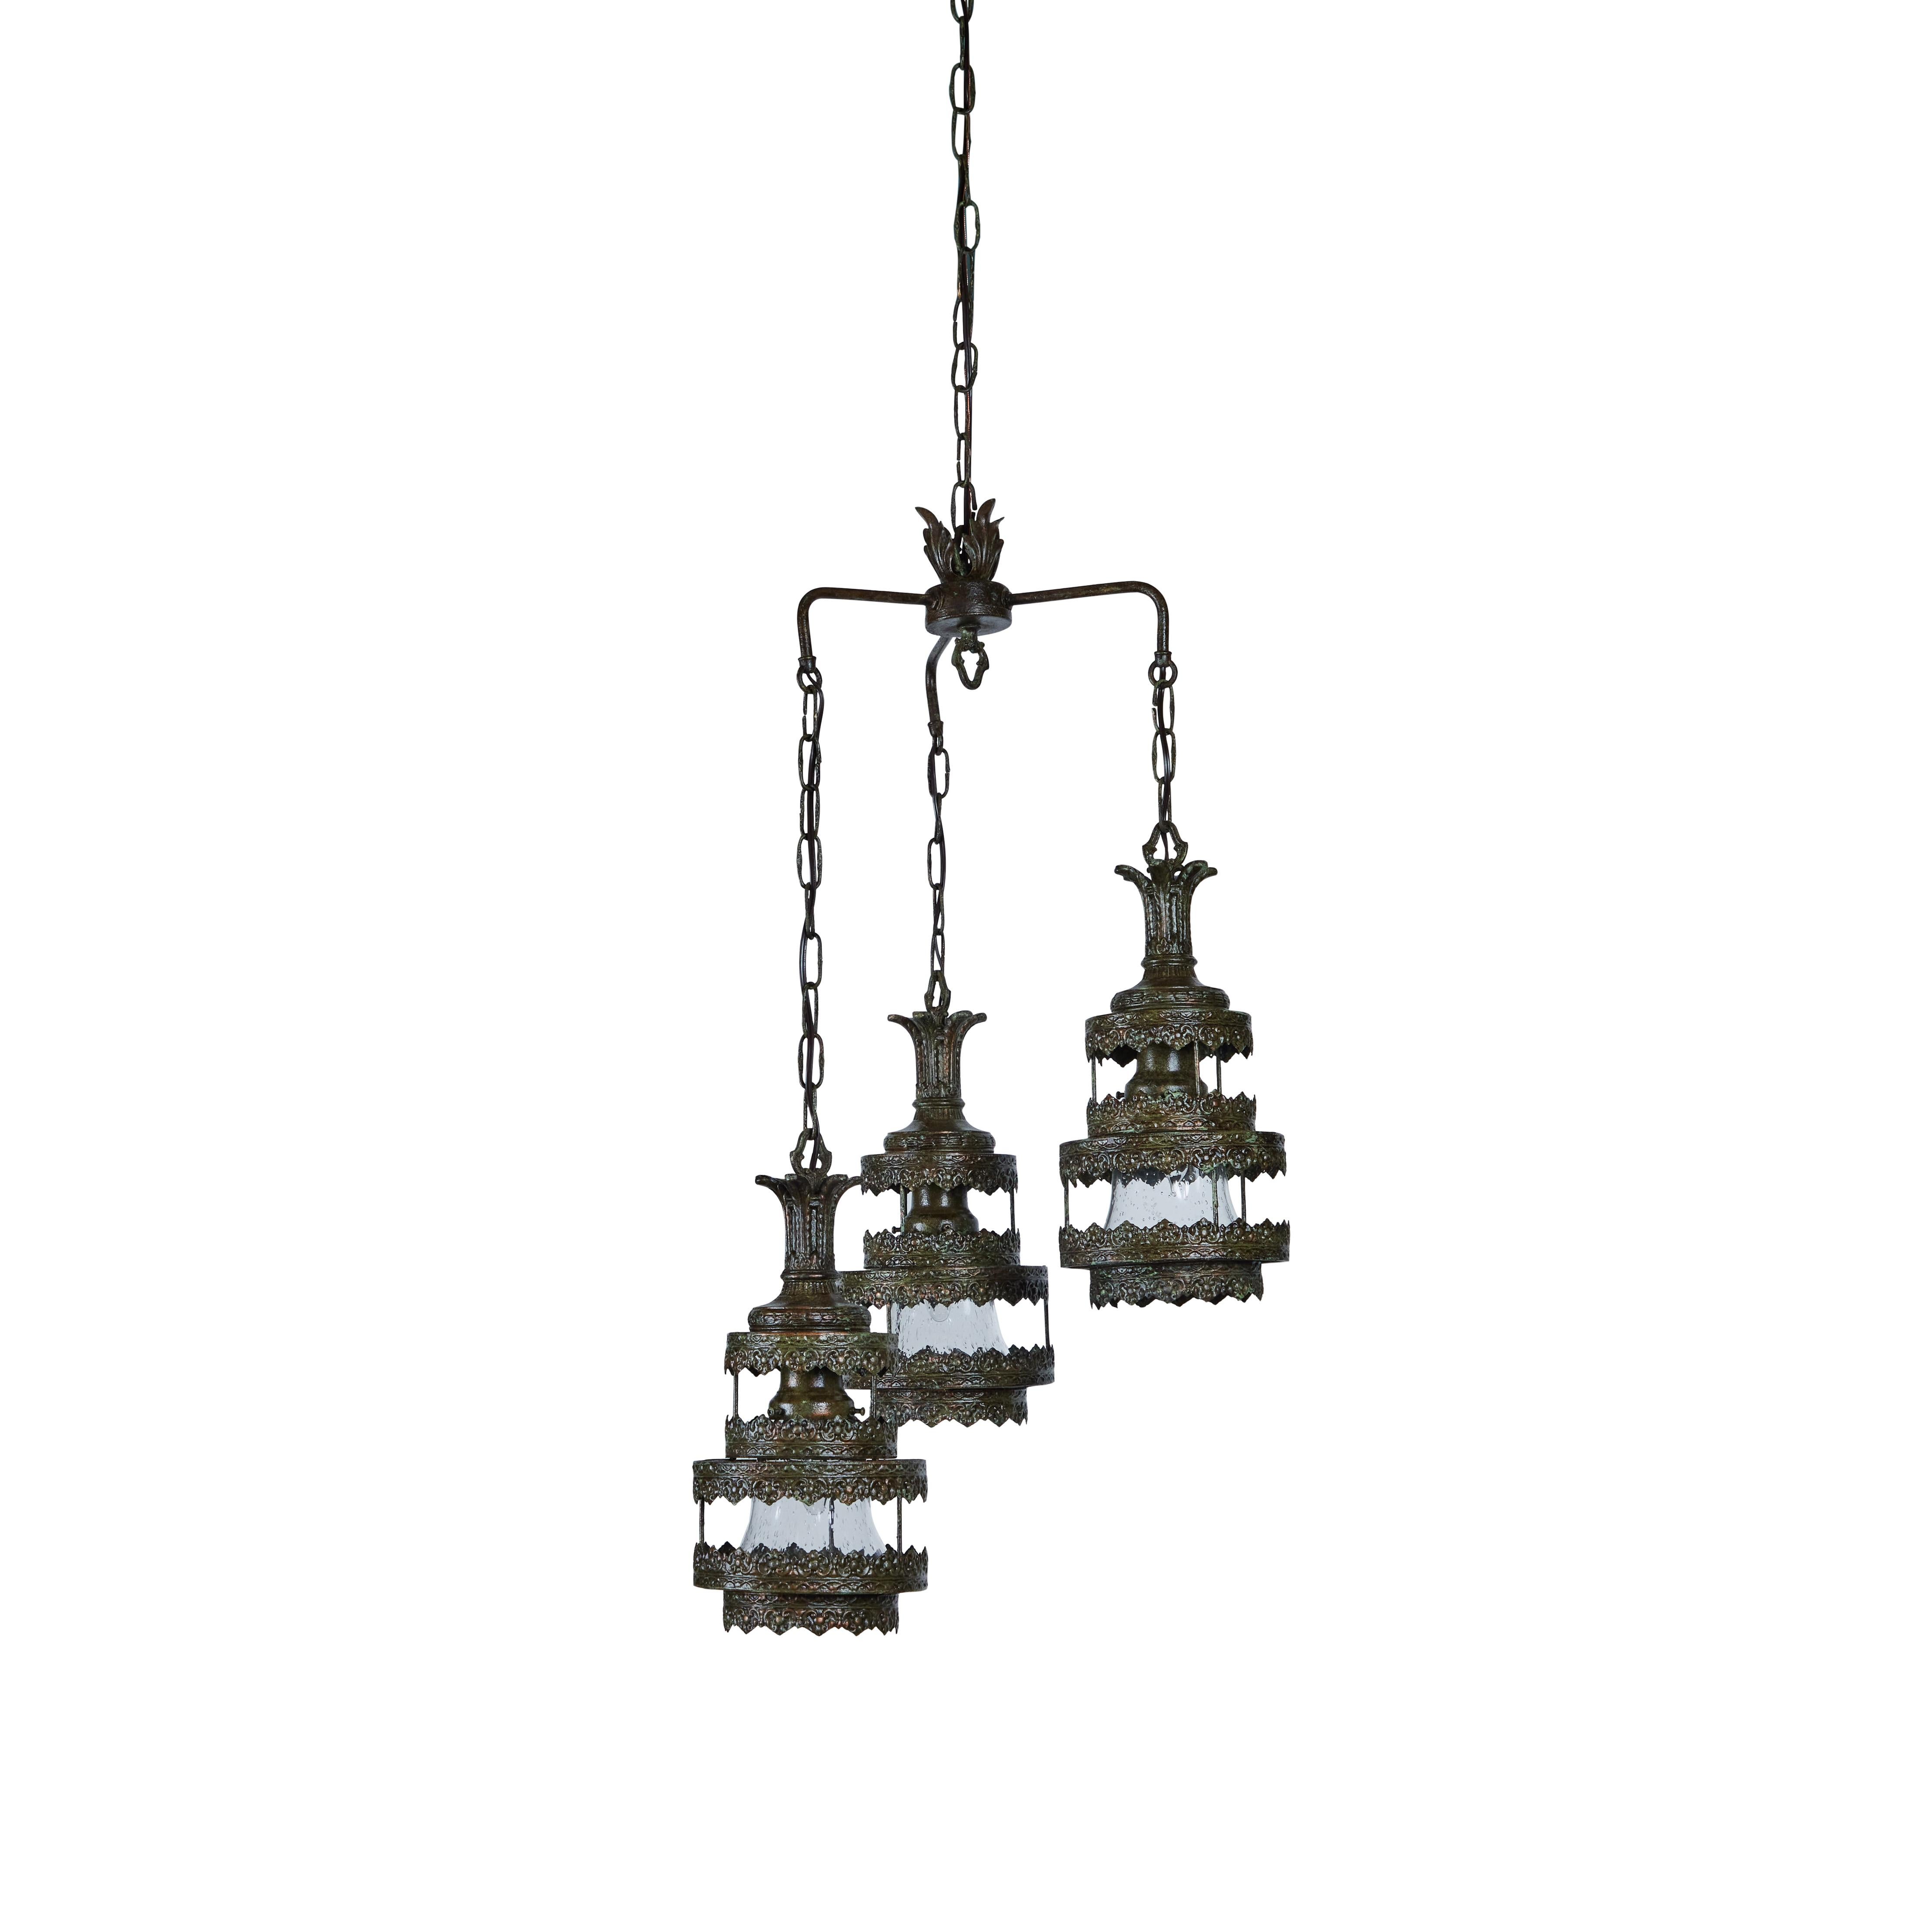 This dramatic vintage 3-drop hanging pendant light is quite a statement.
The entire fixture has been newly refinished in an aged golden green finish and each pendant drop has new bubble glass insert. Its been newly rewired and measures 14.5